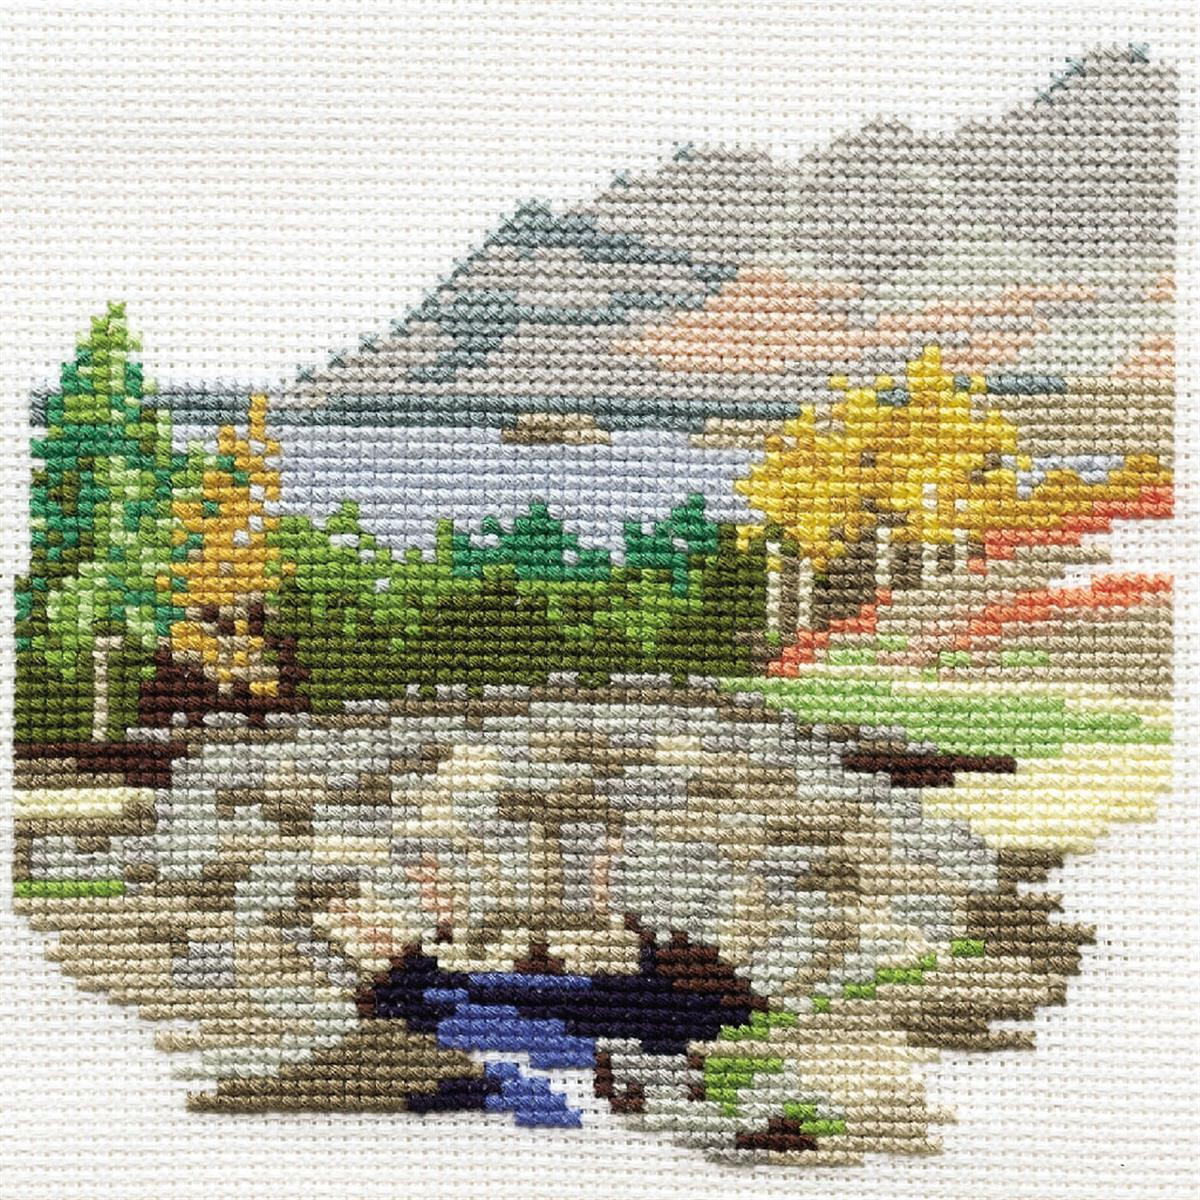 An embroidery pack from Bothy Threads shows a picturesque...